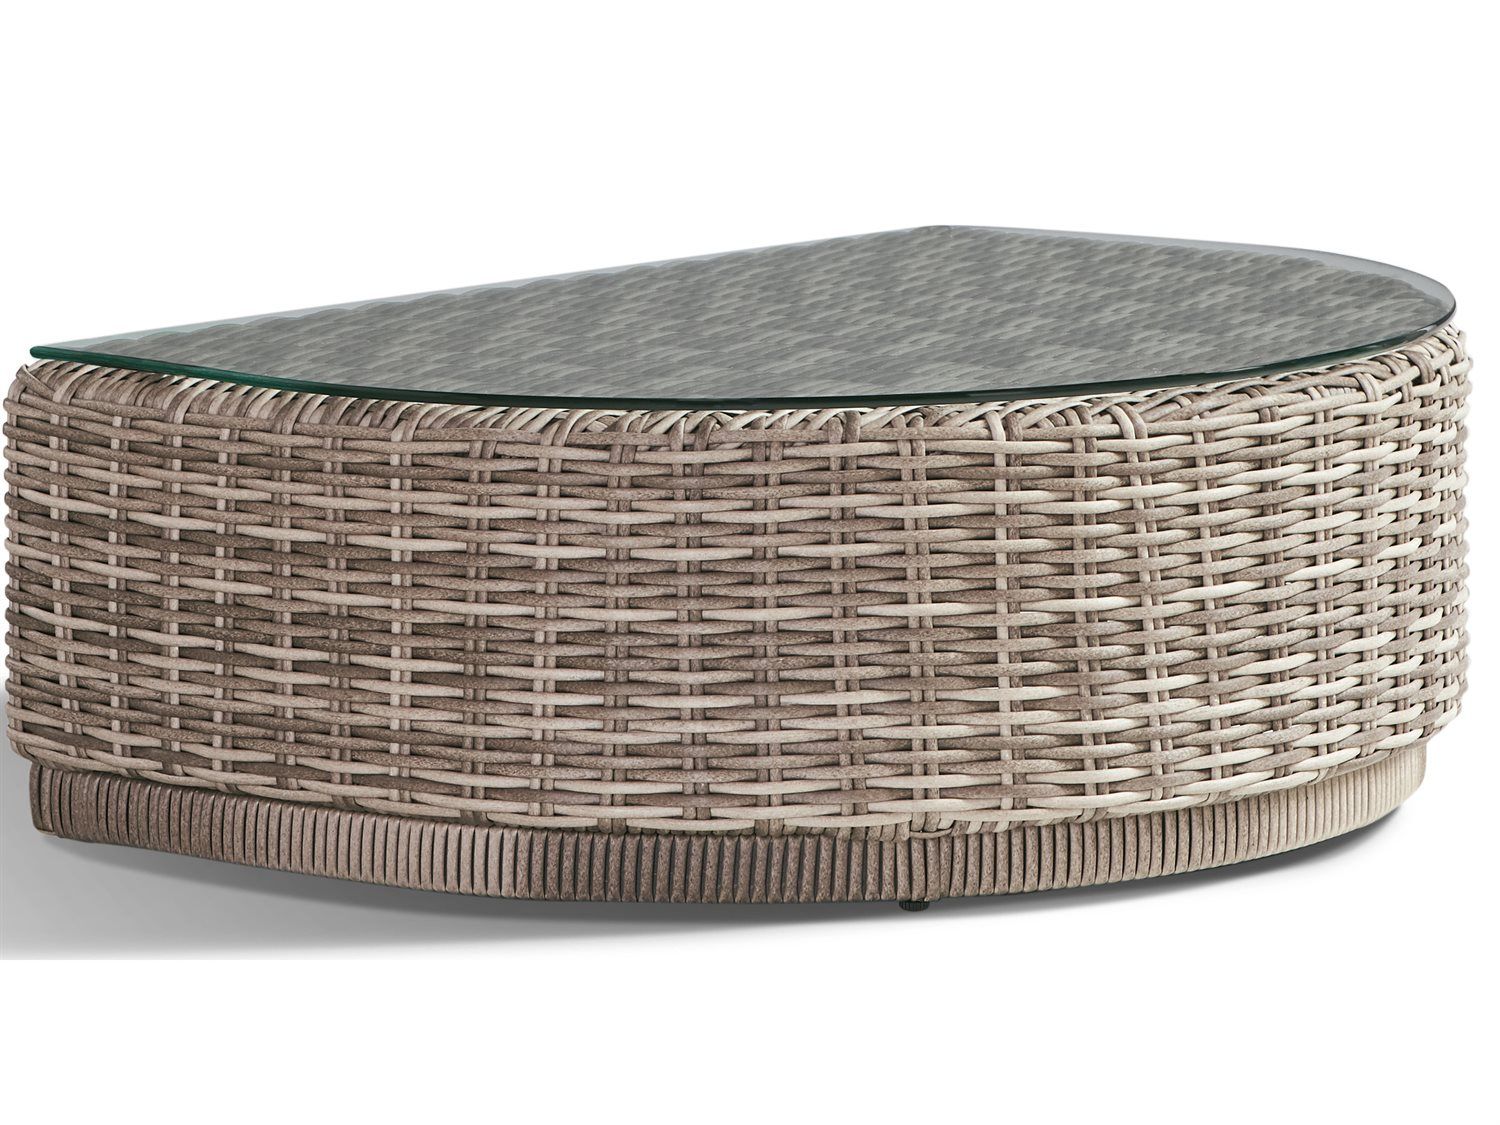 South Sea Rattan Luna Cove Wicker 35'' Half Round Glass Top Coffee Table |  Sr74344 Pertaining To Outdoor Half Round Coffee Tables (View 3 of 15)